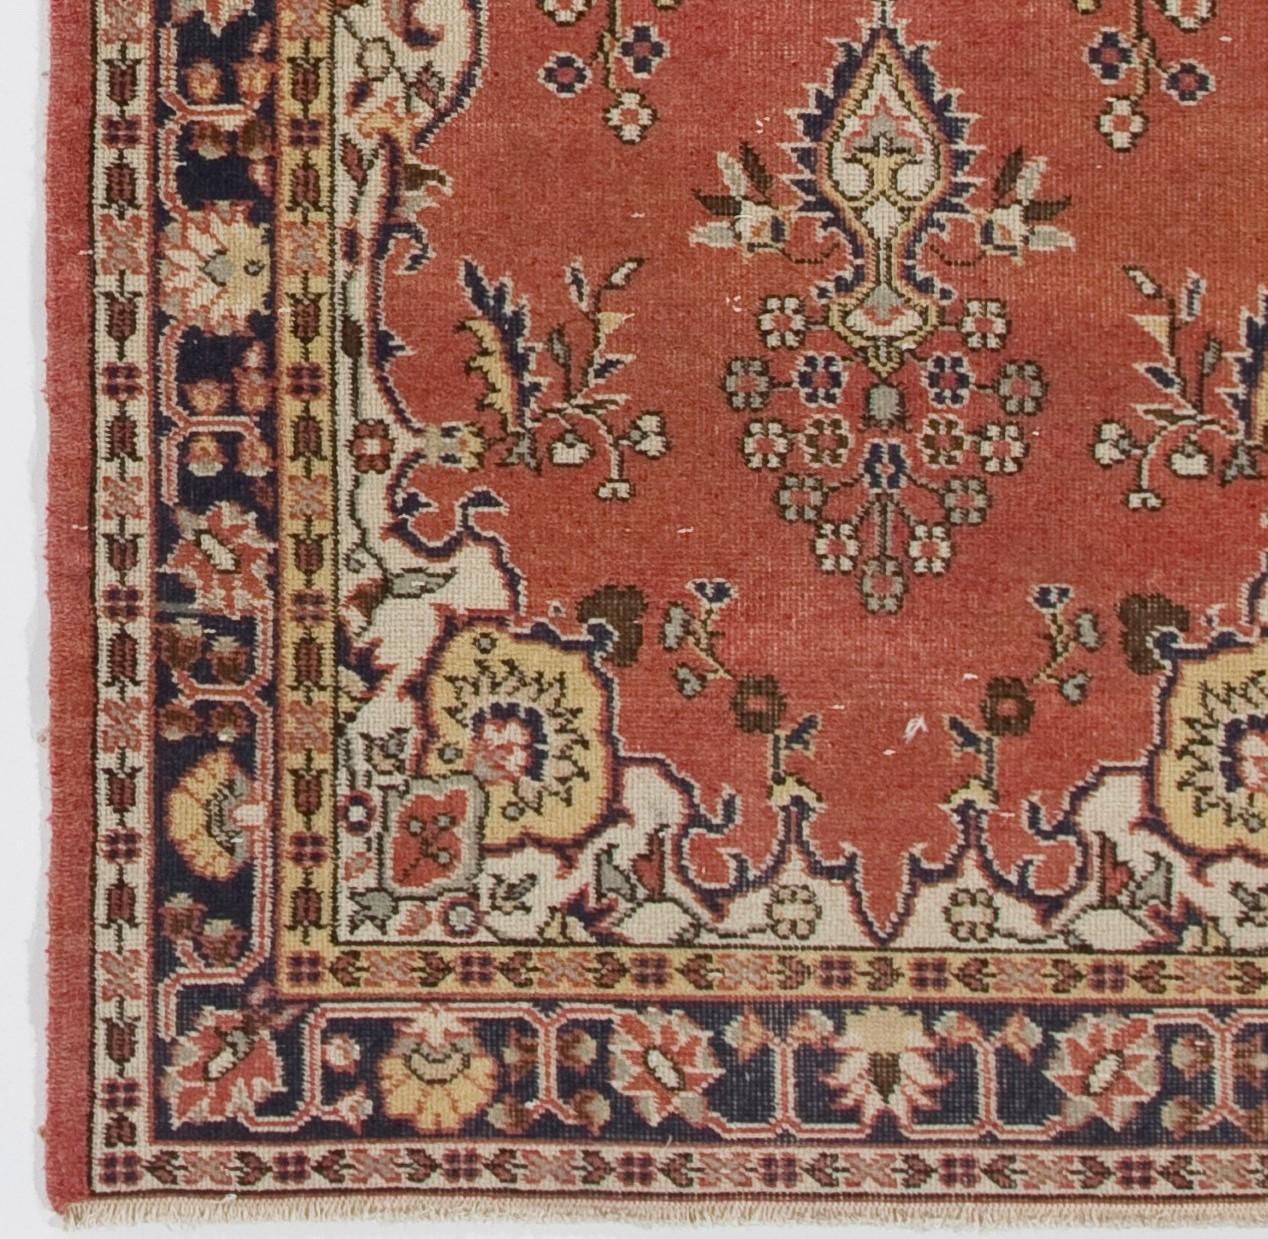 One-of-a-kind vintage and hand-knotted Turkish Oushak rug featuring a central medallion in indigo against a madder red field decorated with elegant floral vases and vines, arabesque corner pieces in ivory and borders in indigo filled with stylized